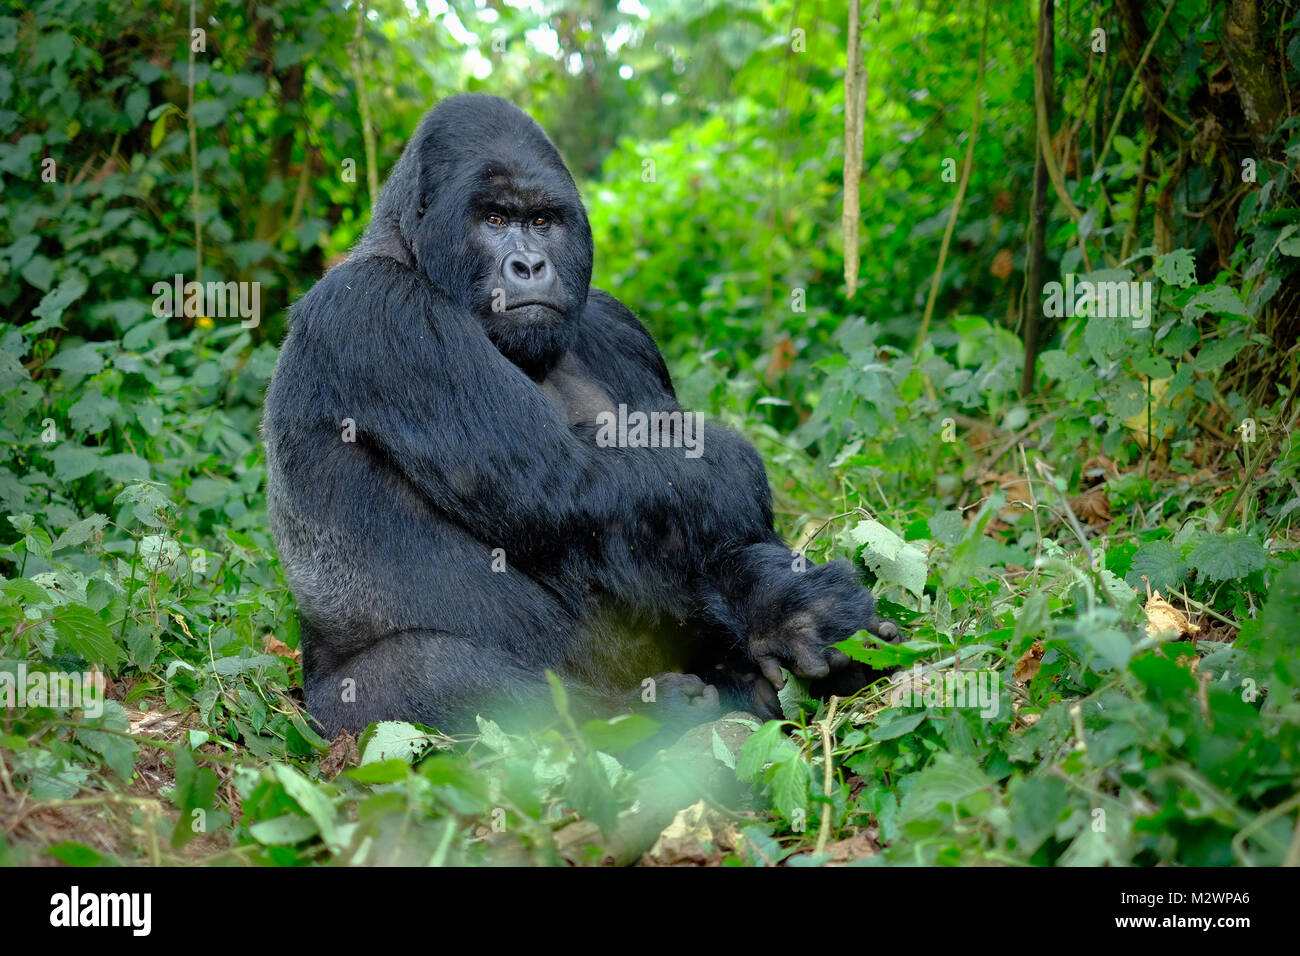 Silverback mountain gorilla looking intently into camera and posing in green jungle of Eastern Africa. Stock Photo